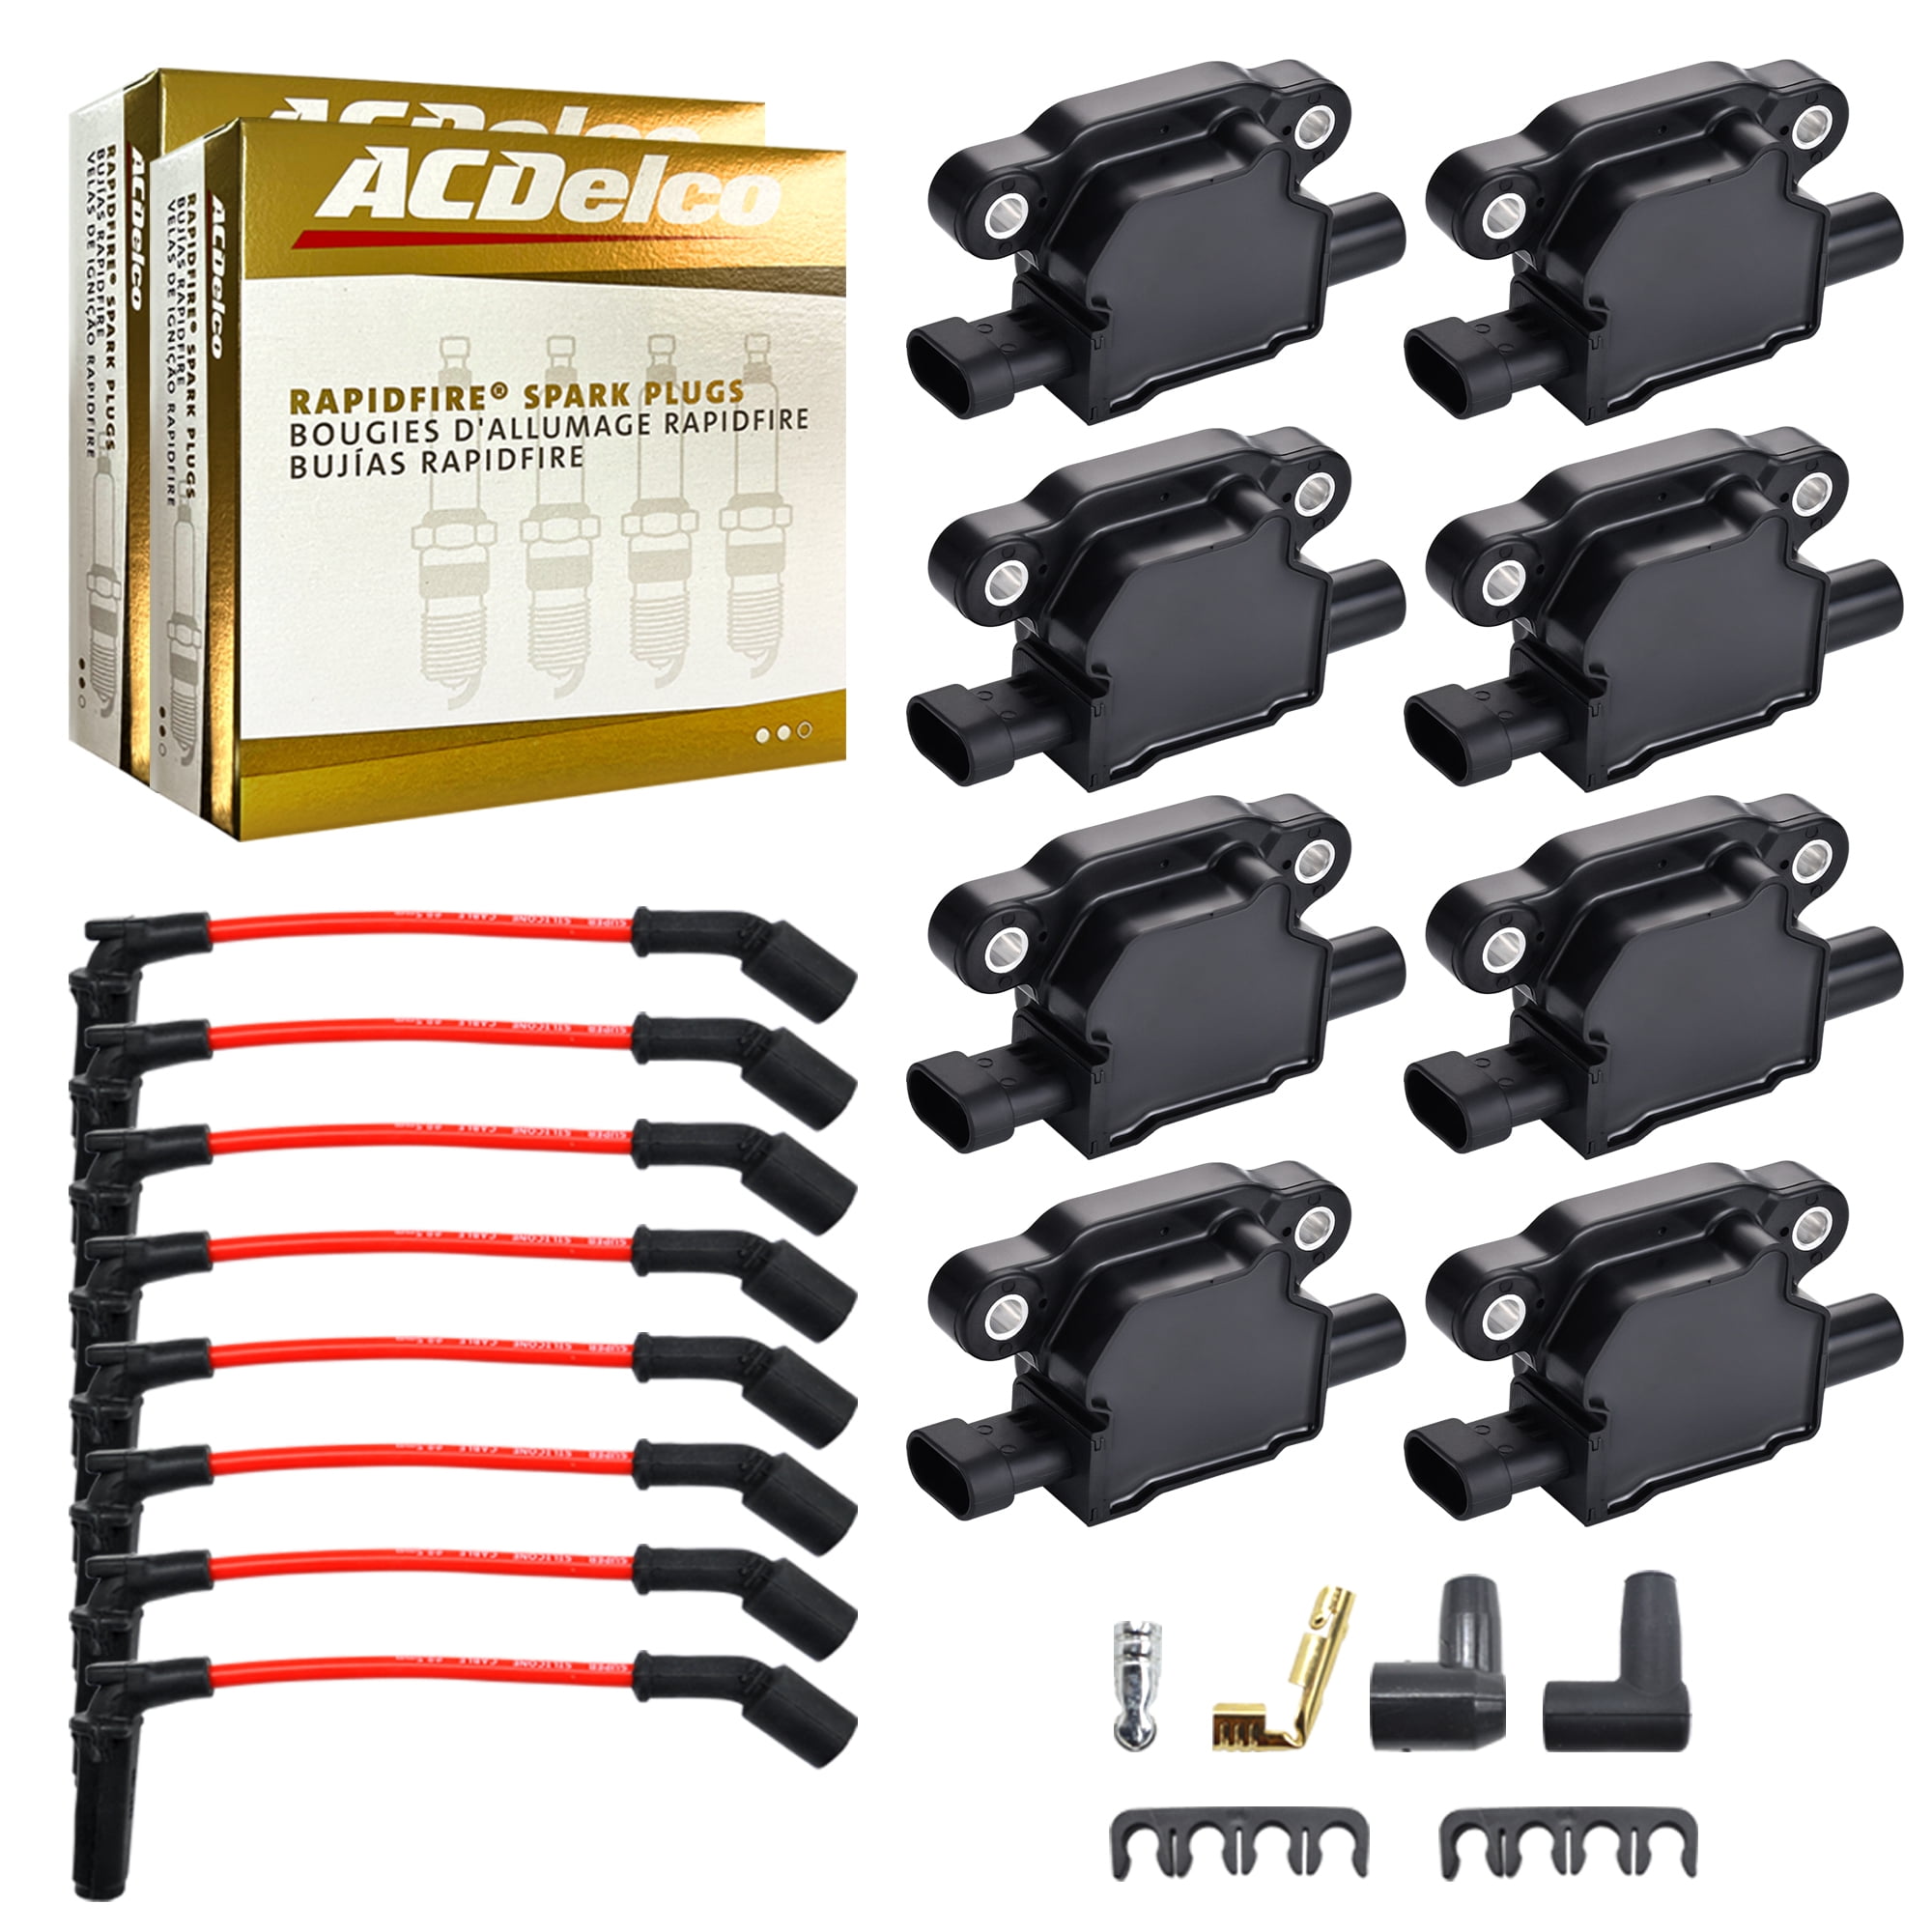 AZHZ UF-725 Automotive Replacement Ignition Coil Pack Set of Fit for  Spark 2013-2014｜オイル、バッテリーメンテナンス用品